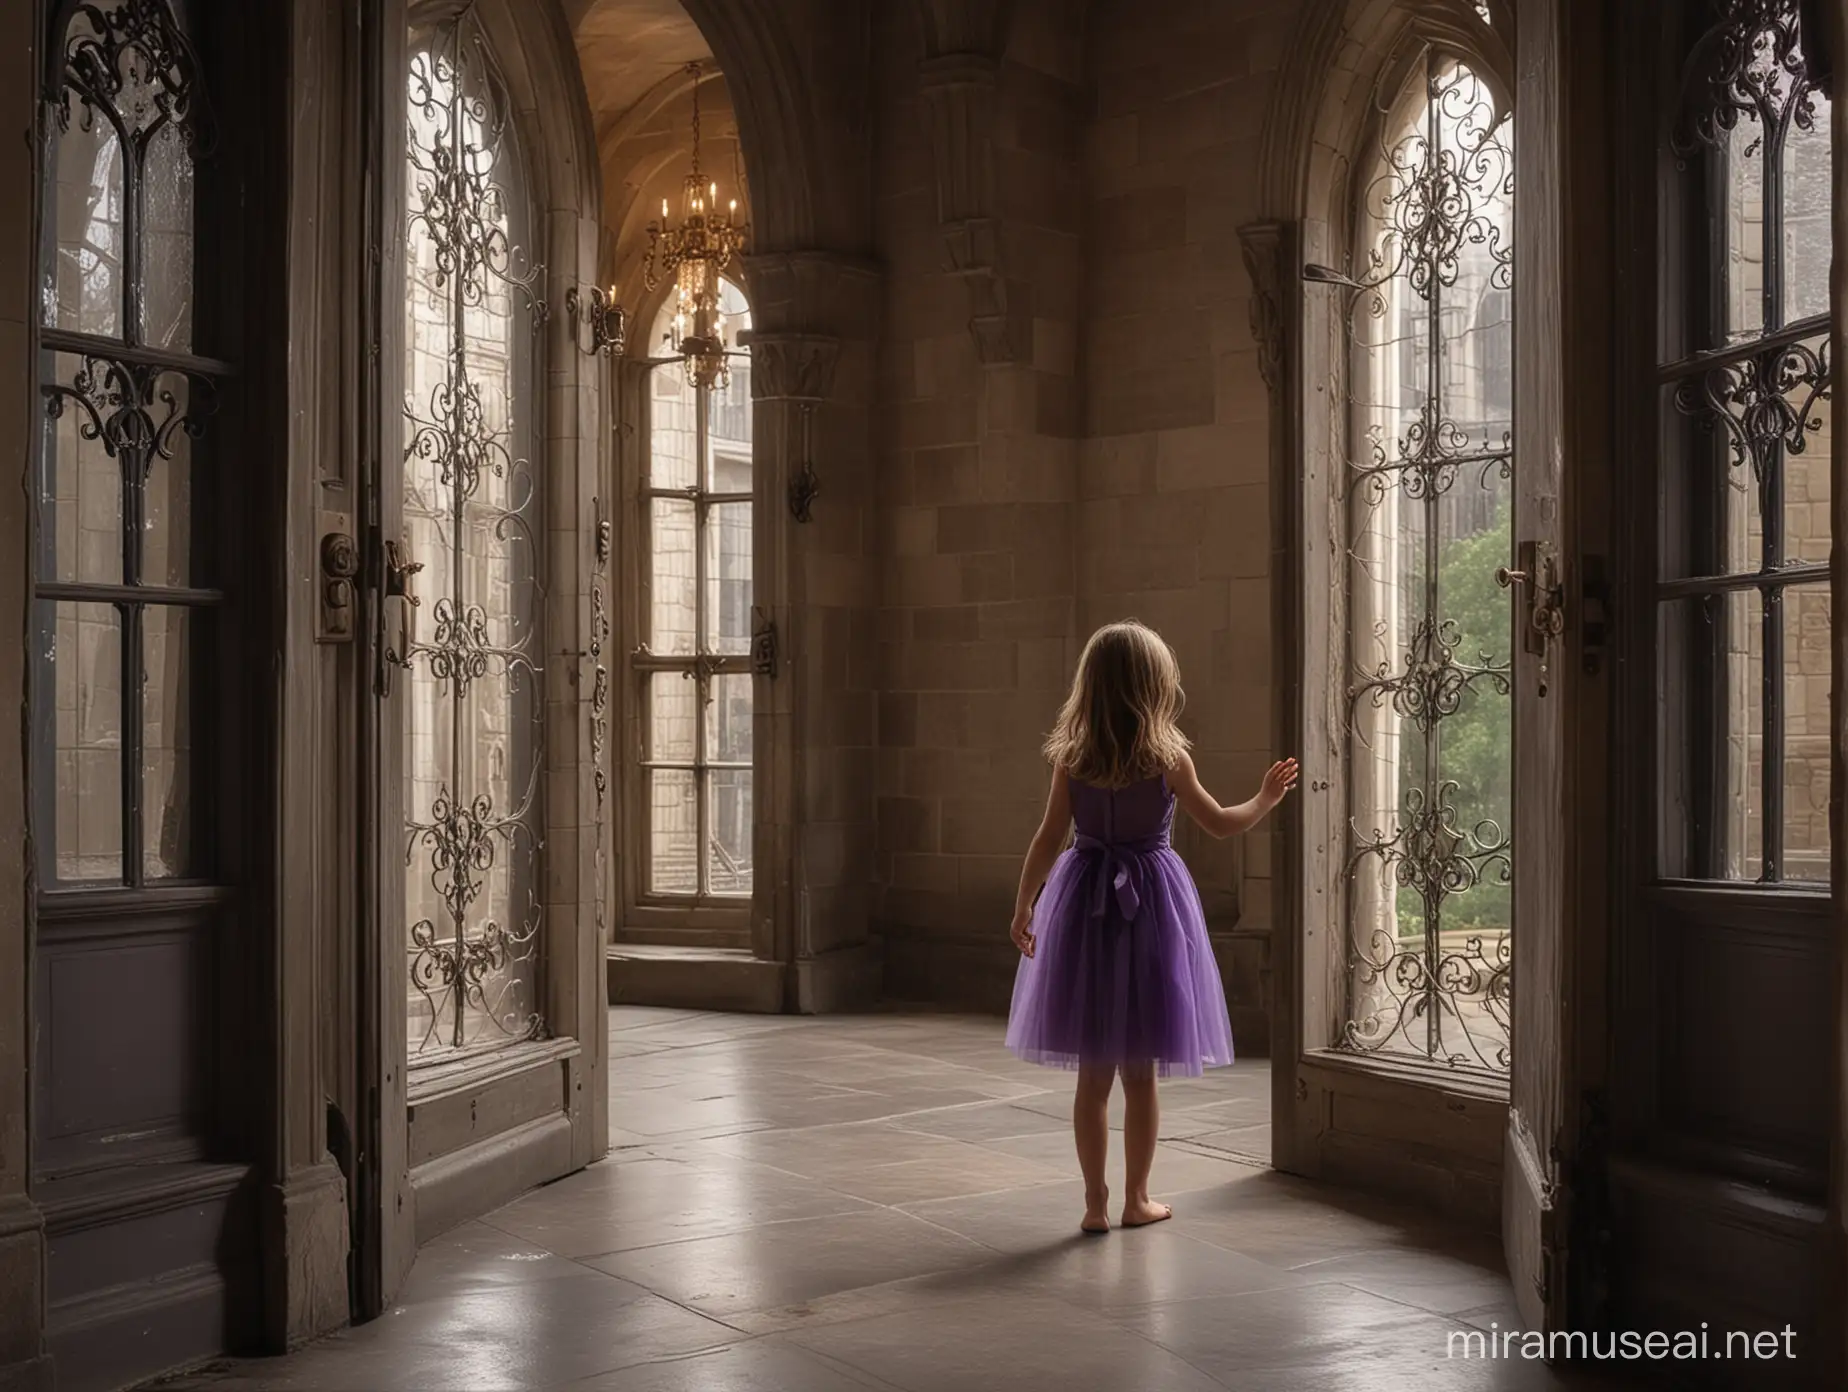 Majestic Castle Cathedral Windows with Girl Knocking